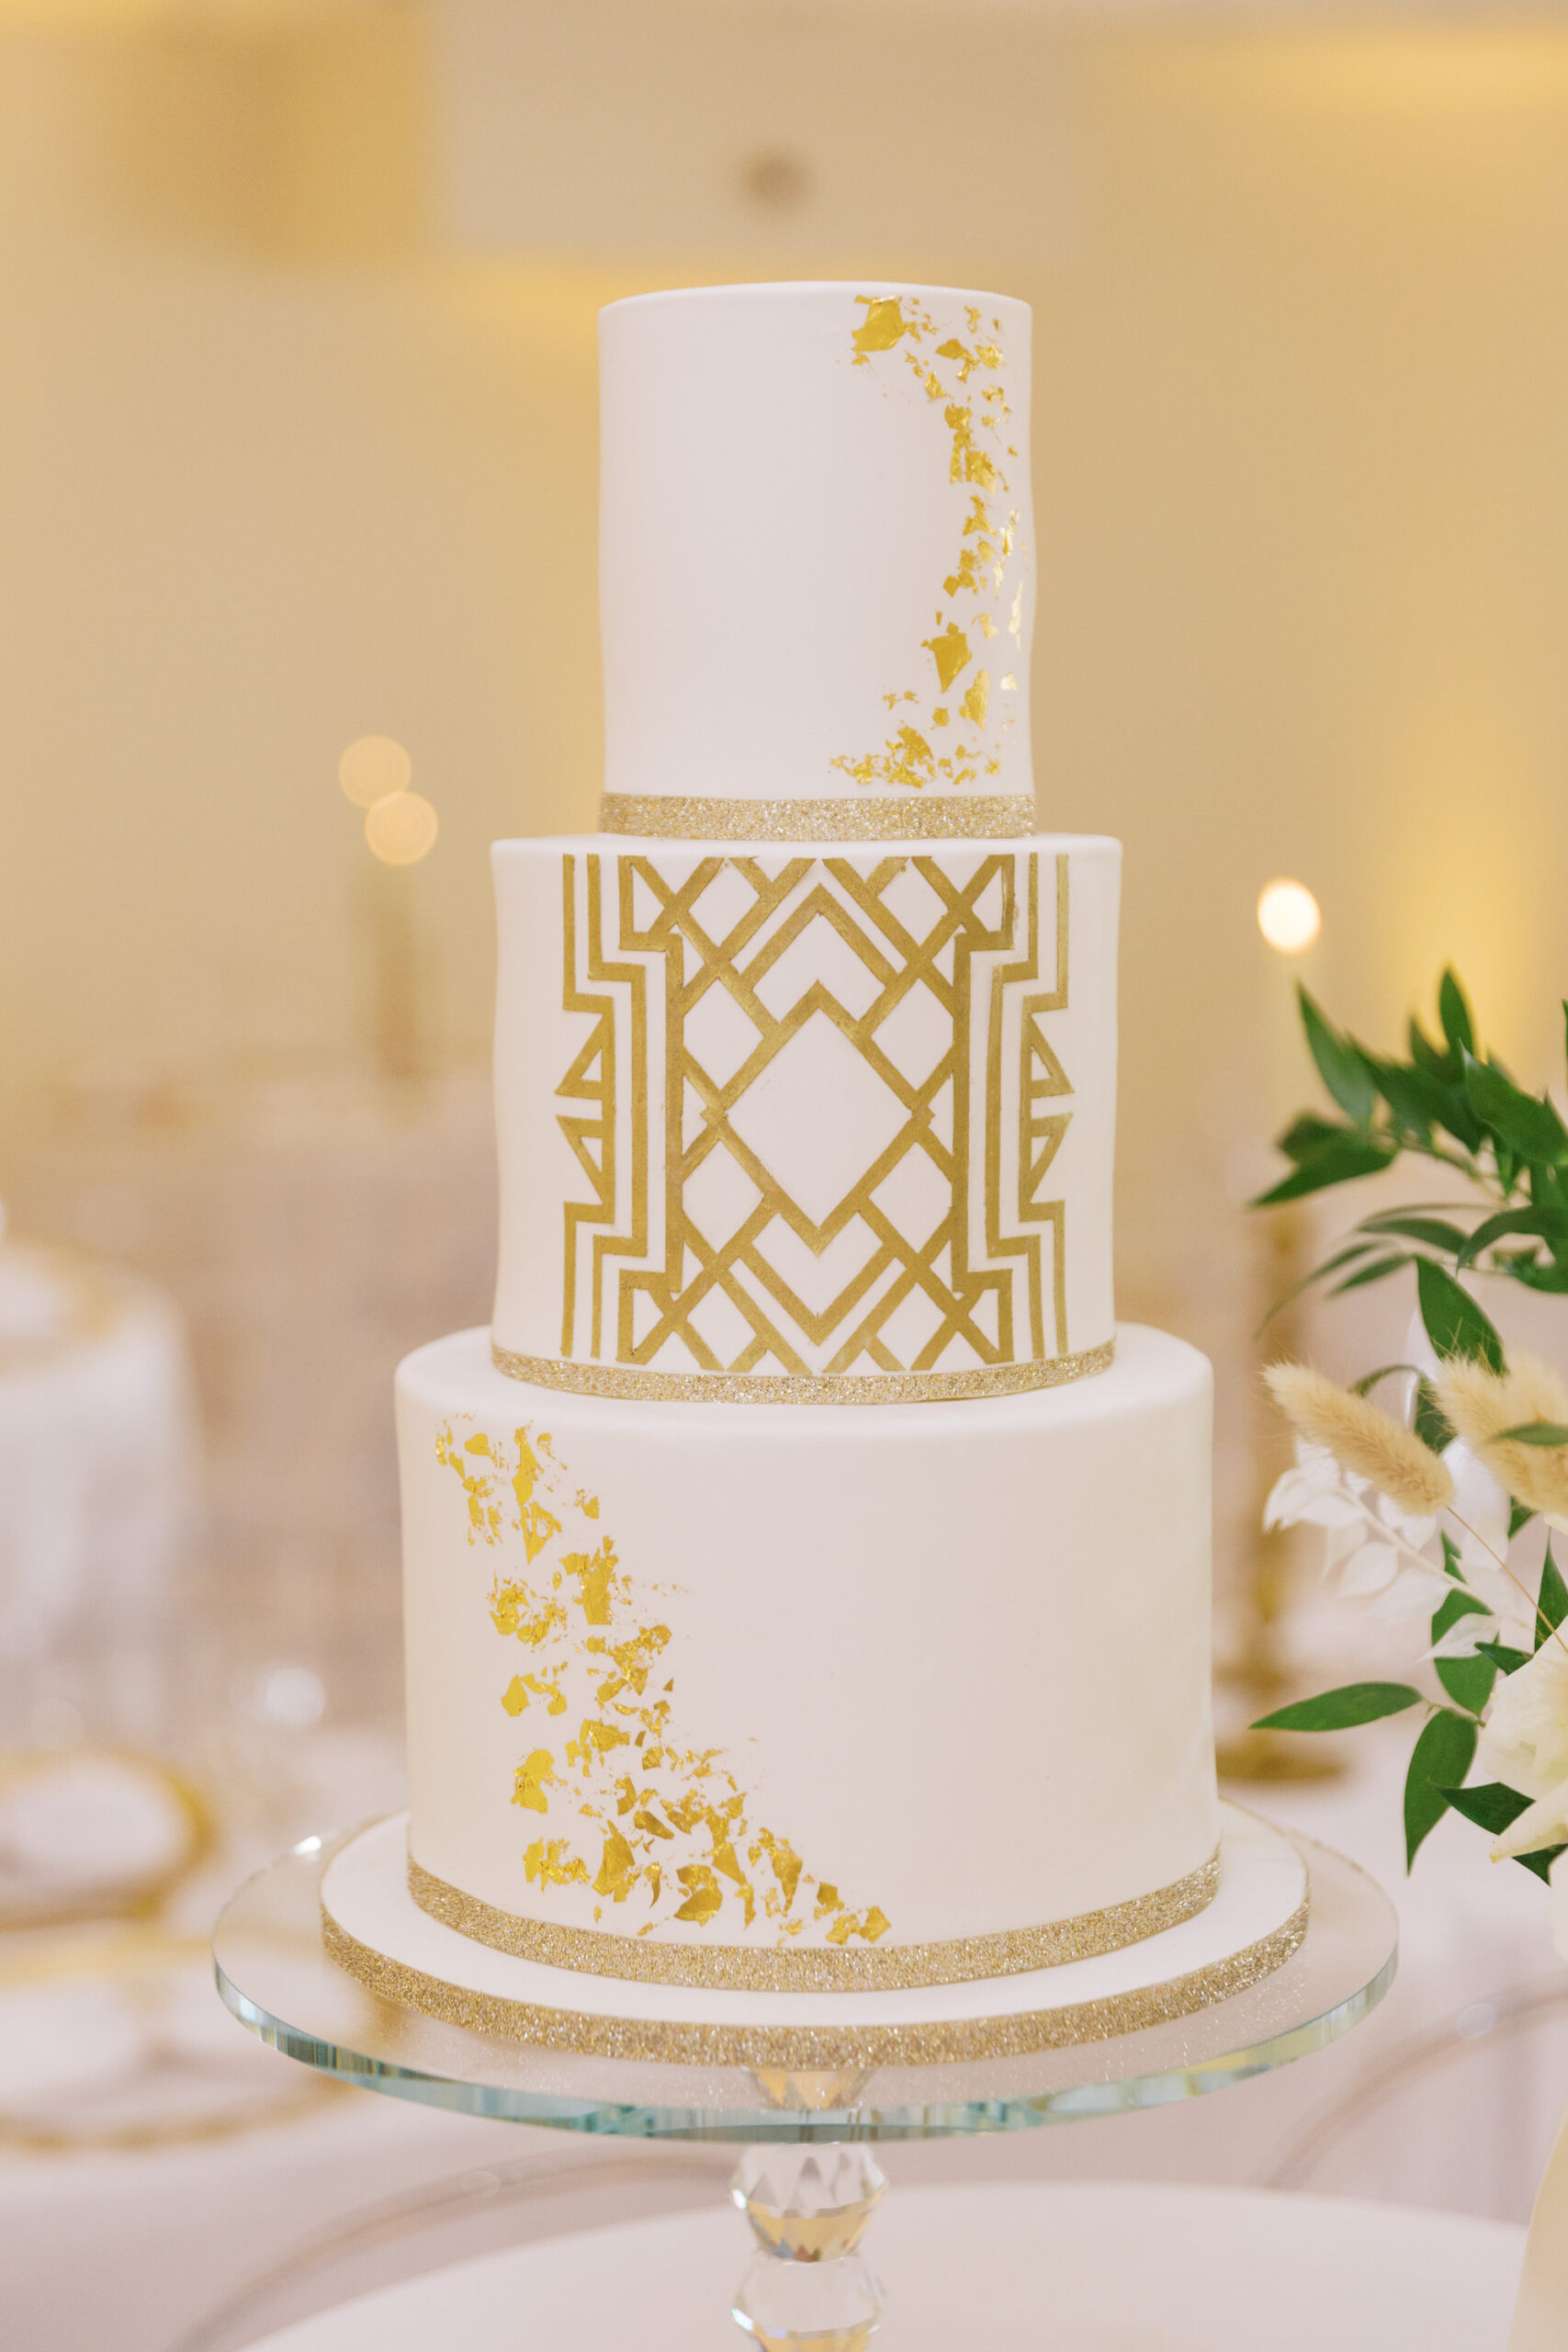 Vintage Old Hollywood Gatsby Inspired Wedding Cake, Three Tier White Cake With Gold Geometric Design and Foil | Tarpon Springs Wedding Venue The Whitehurst Gallery